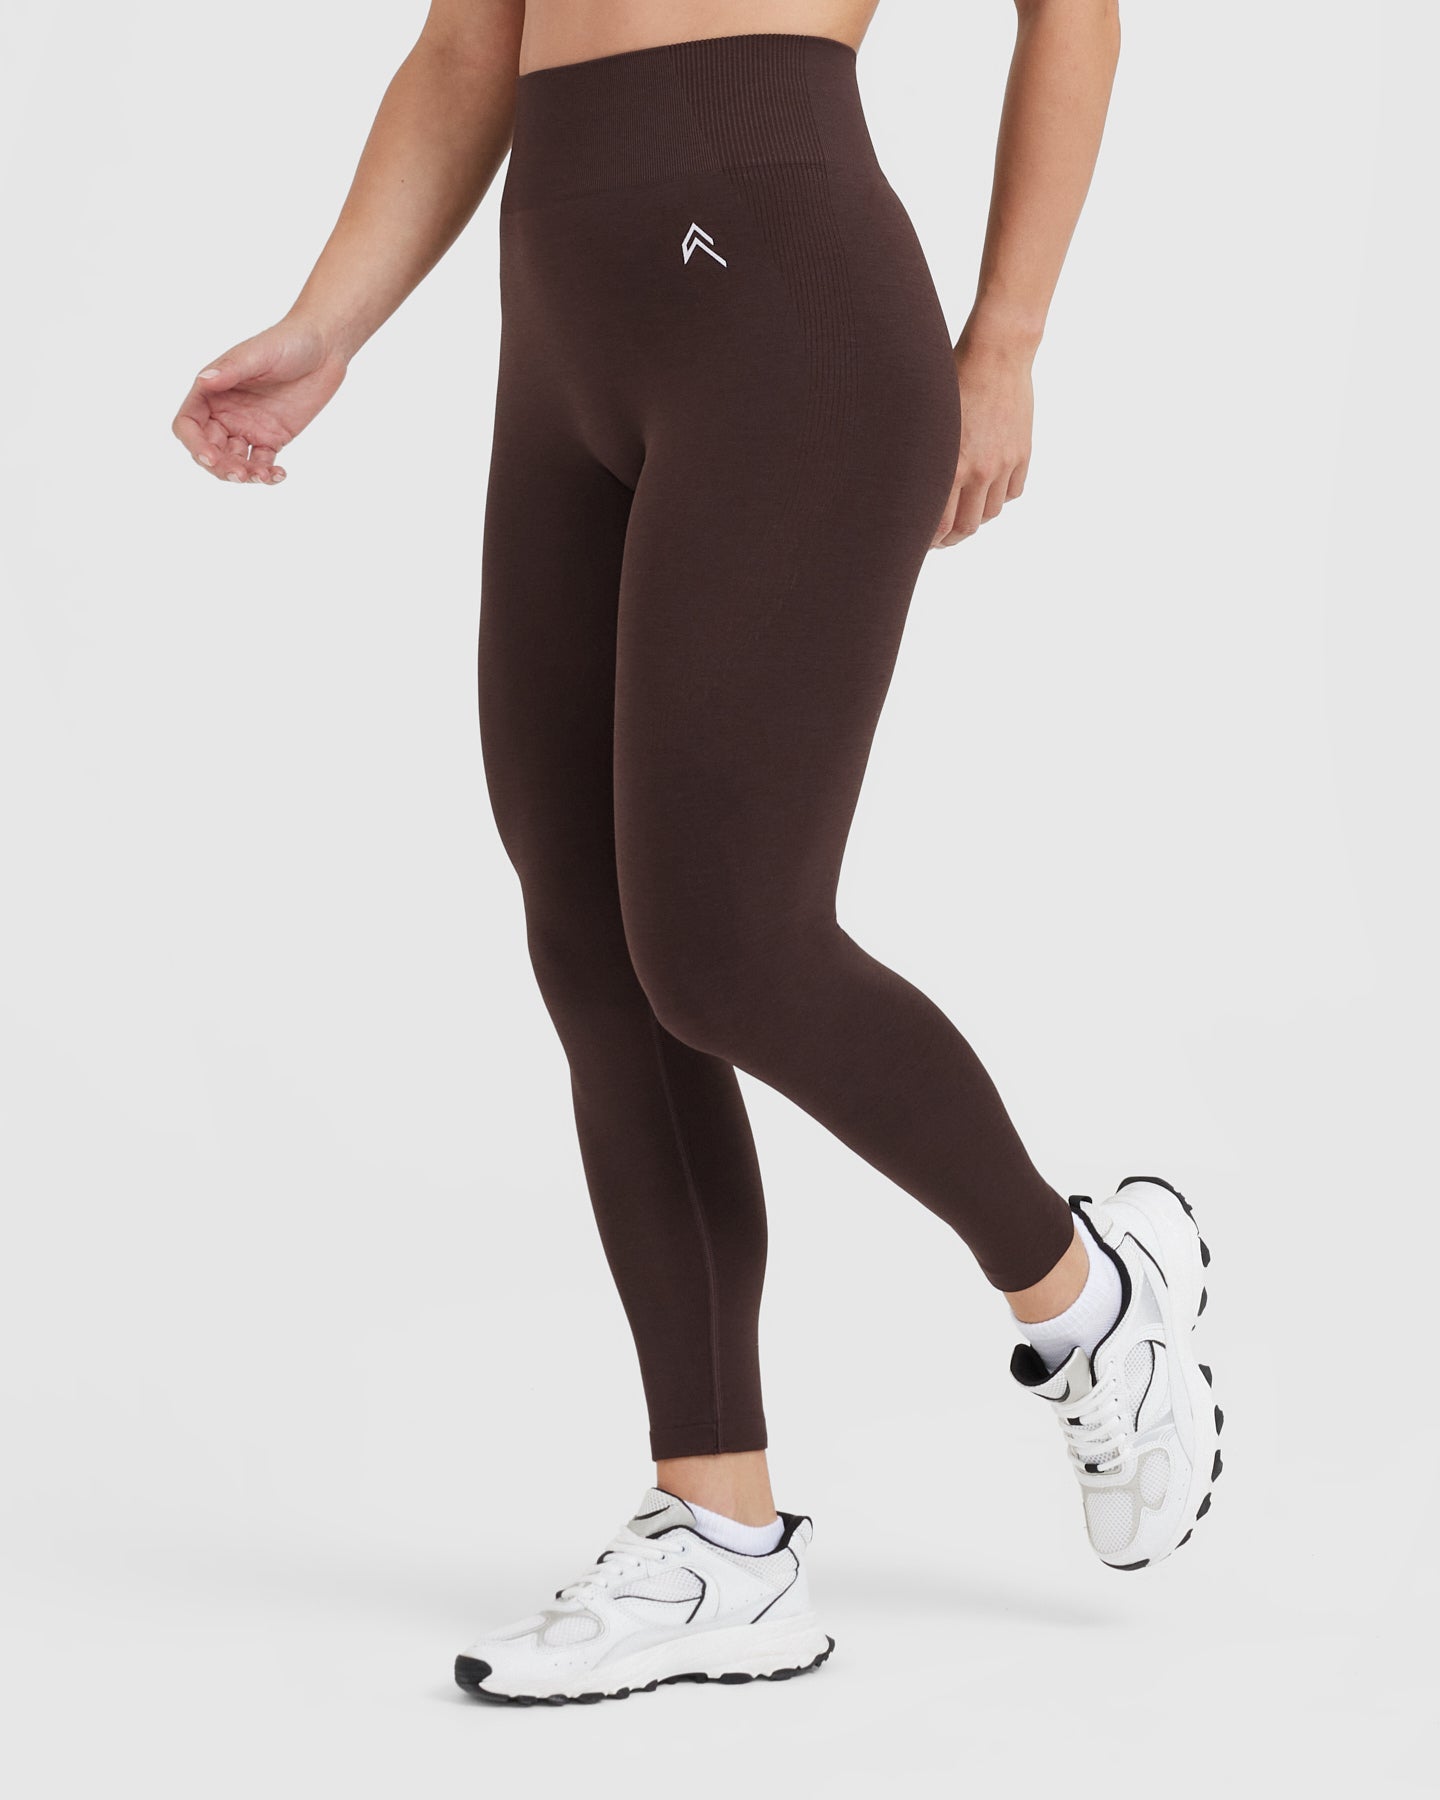 Classic Seamless 2.0 Leggings 70% US Cocoa Marl Oner | Active